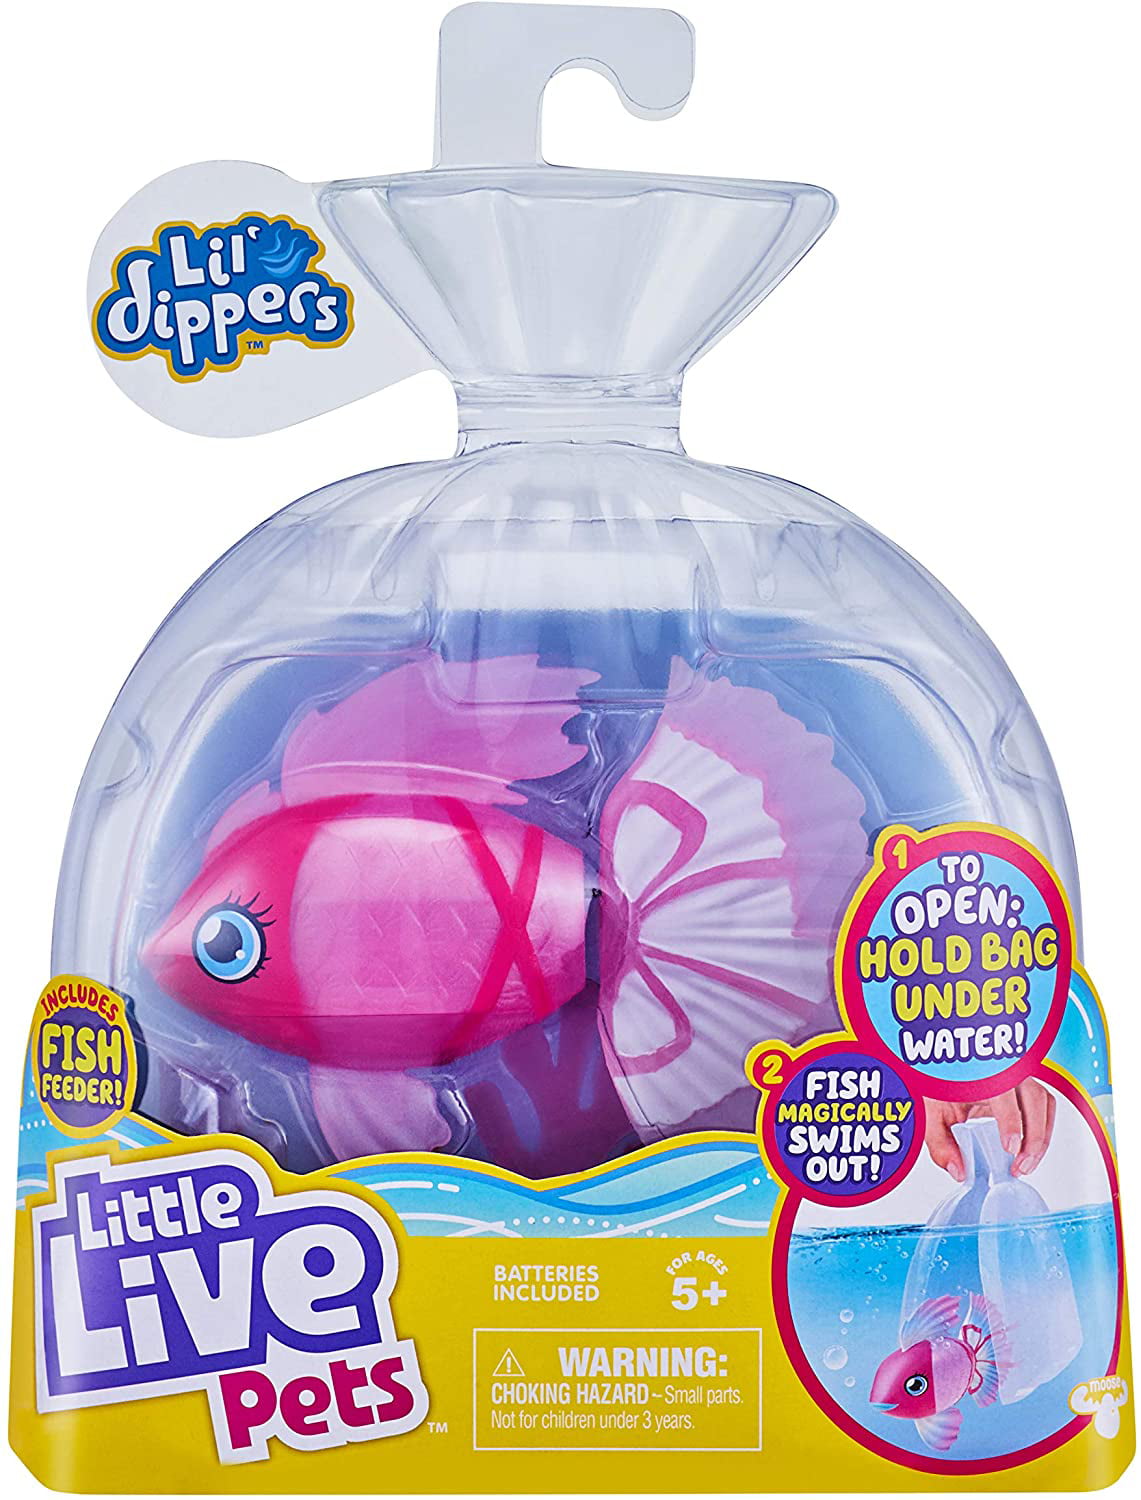 Little Live Pets Lil Dippers Furtail Fish & Feeder 2019 Moose for sale online 